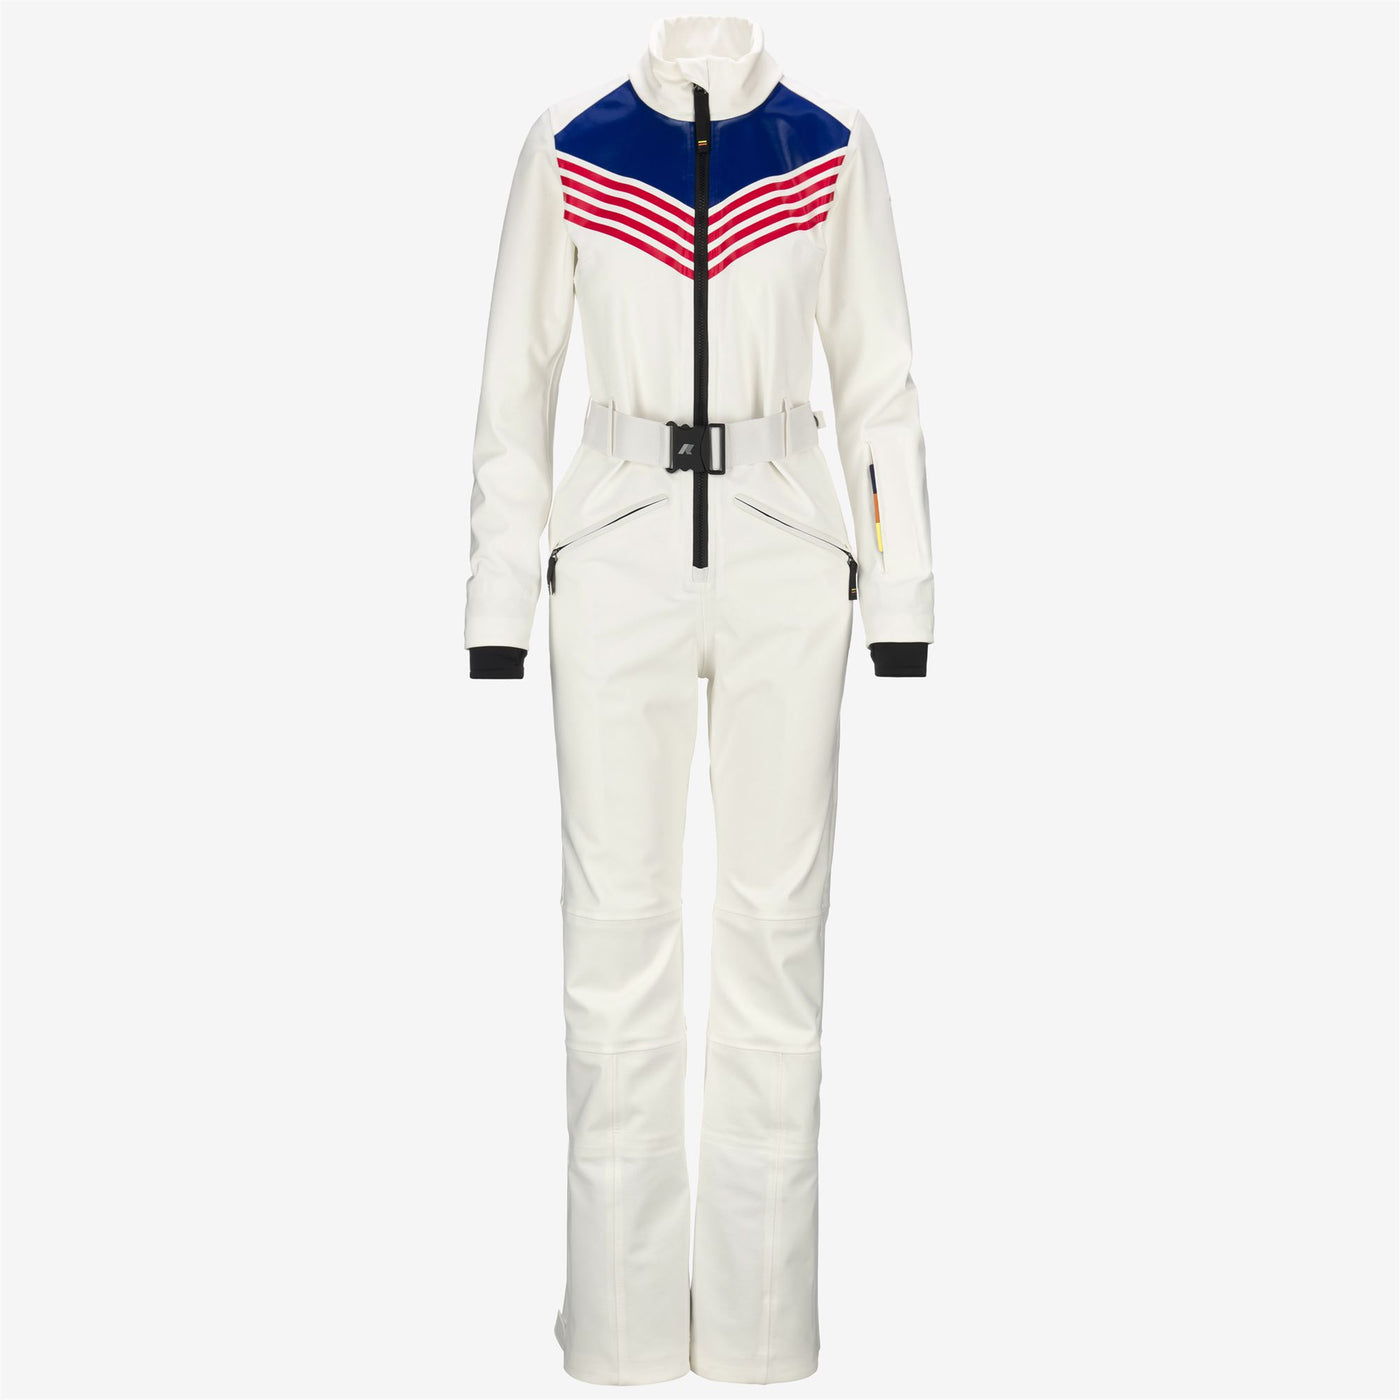 Sport Suits Woman LECHERE ICONIC LOGO Coverall Suit WHITE G-RED-BLUE R Photo (jpg Rgb)			